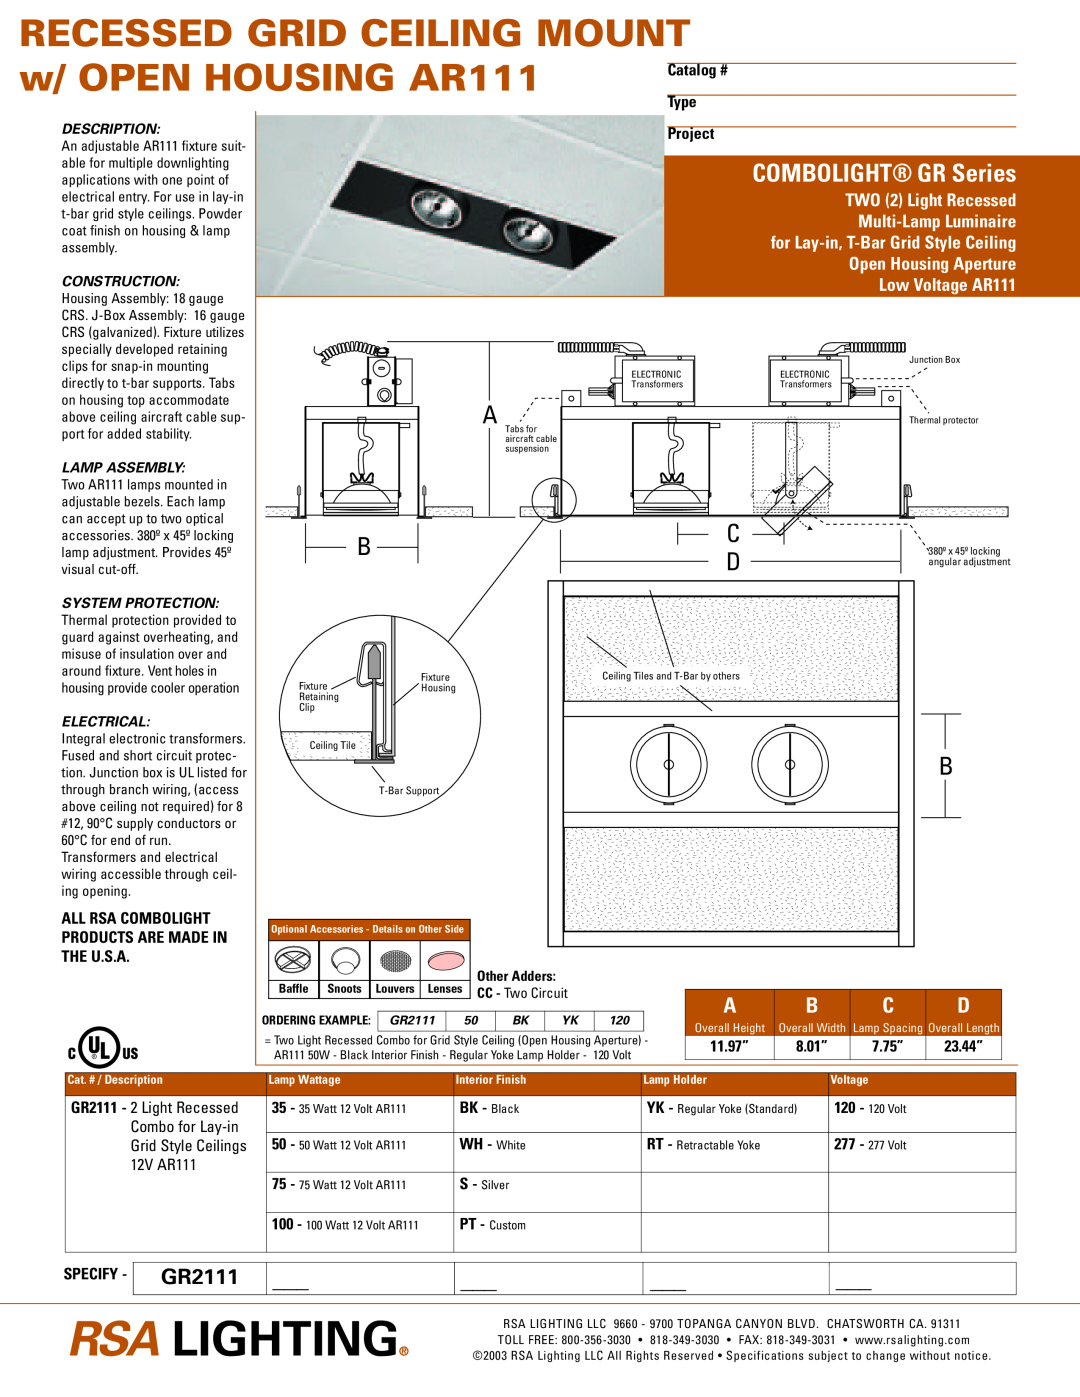 Cooper Lighting GR2111 specifications Recessed Grid Ceiling Mount, w/ OPEN HOUSING AR111, COMBOLIGHT GR Series, Catalog # 